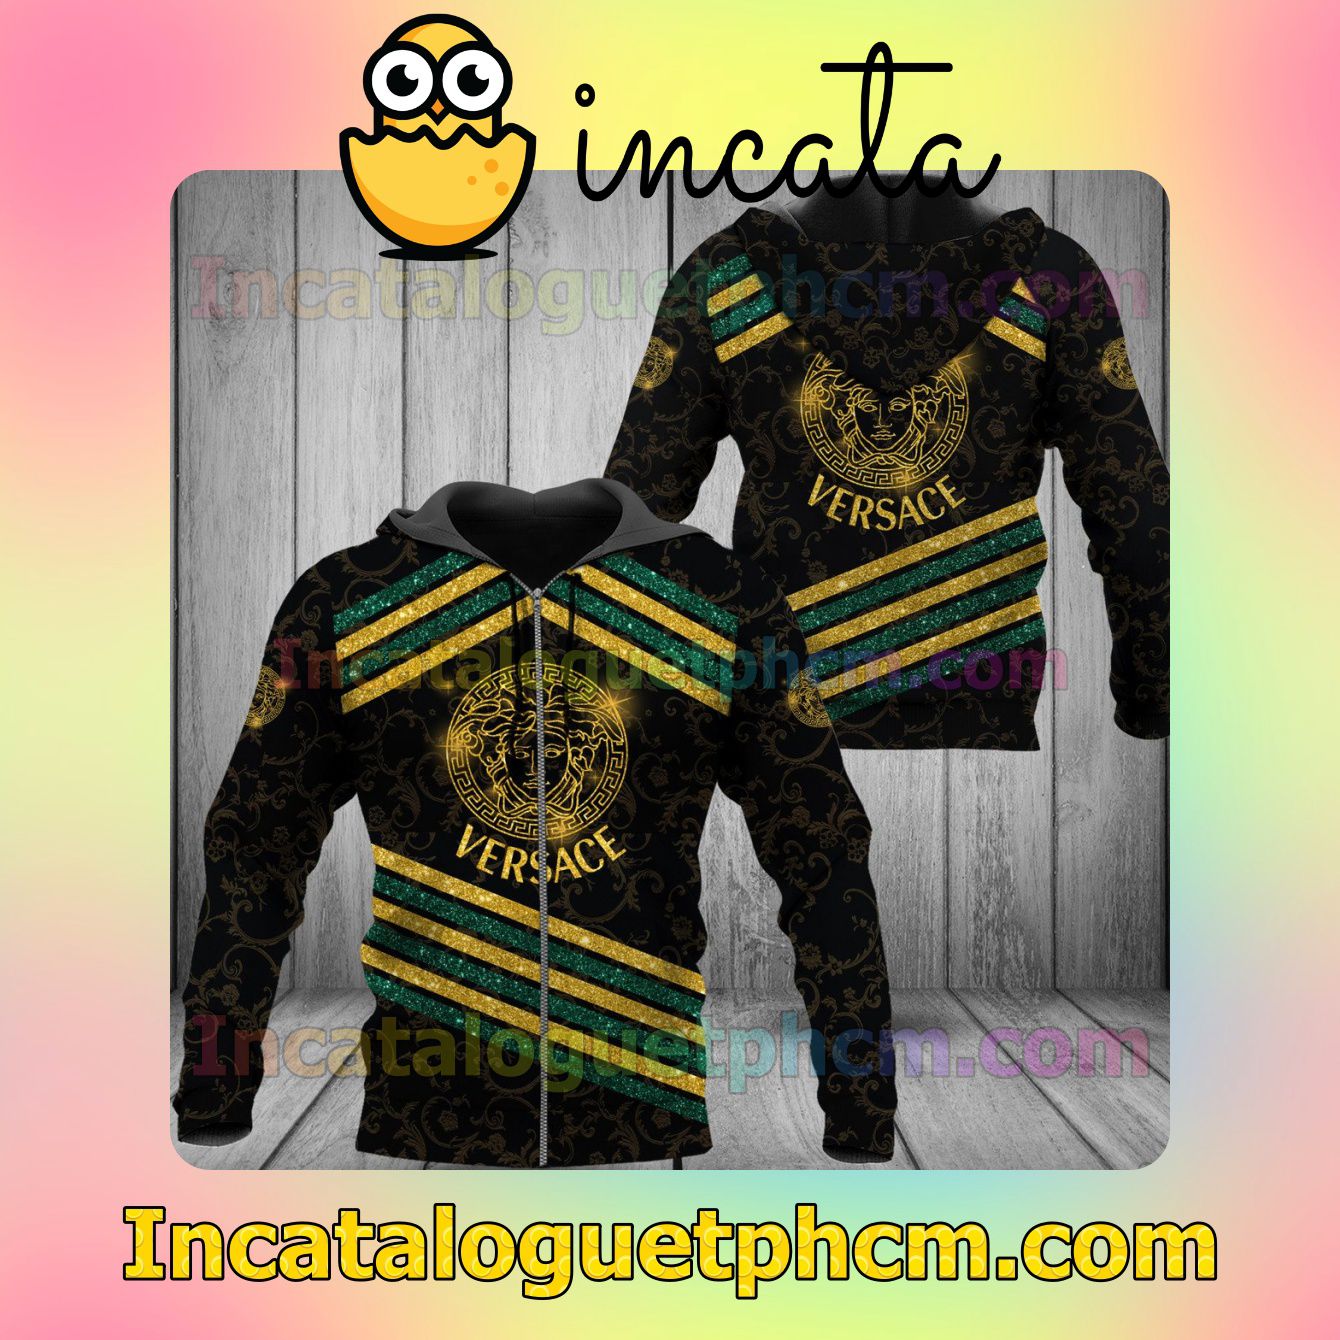 Sale Off Versace Yellow And Green Glitter Stripes Long Sleeve Jacket Mens Hoodie